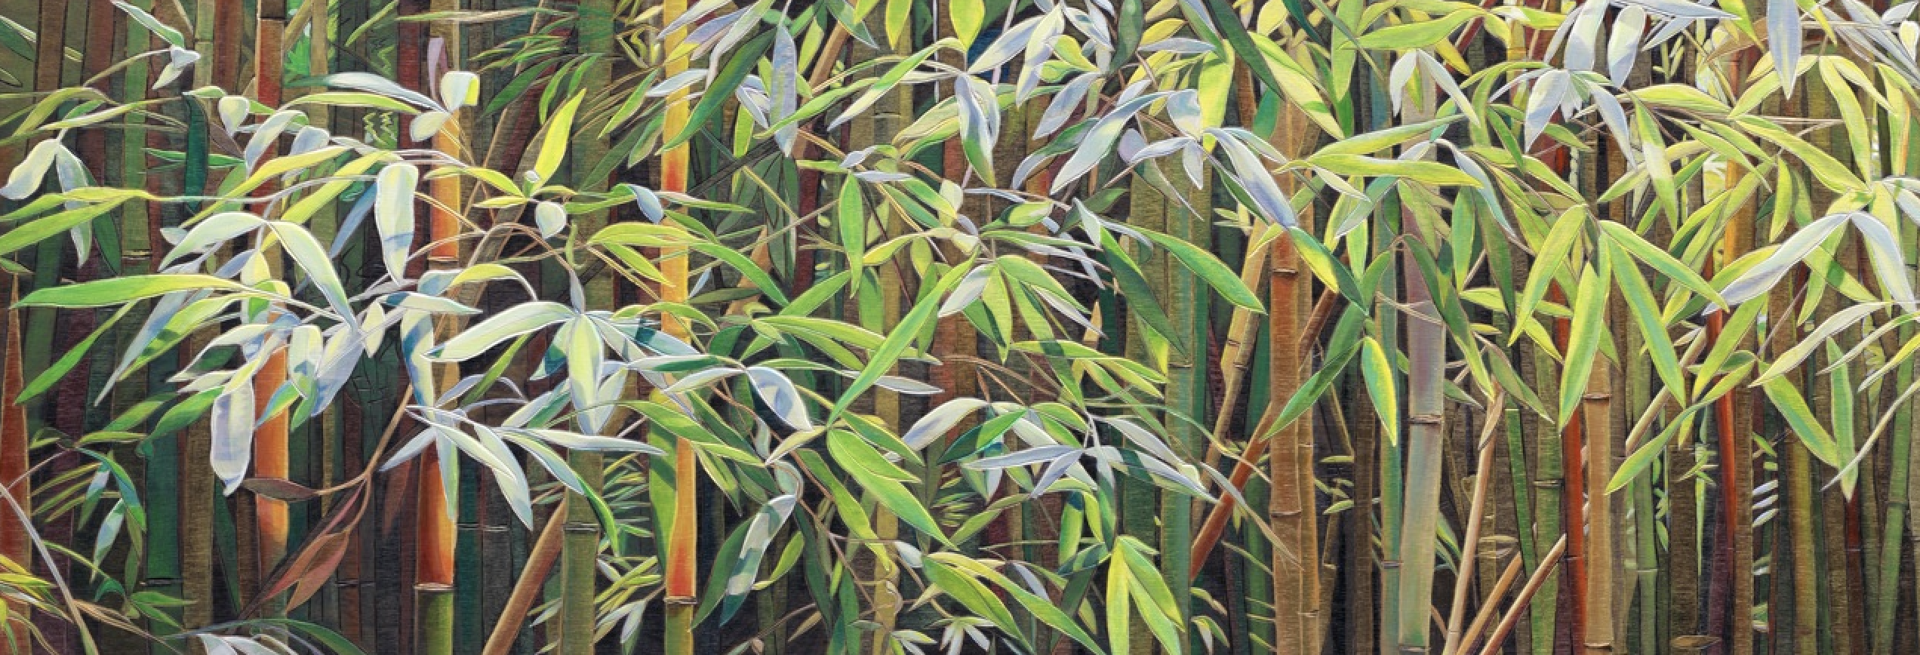 Song of Light in the Shade of the Bamboo Forest by Joelle C.